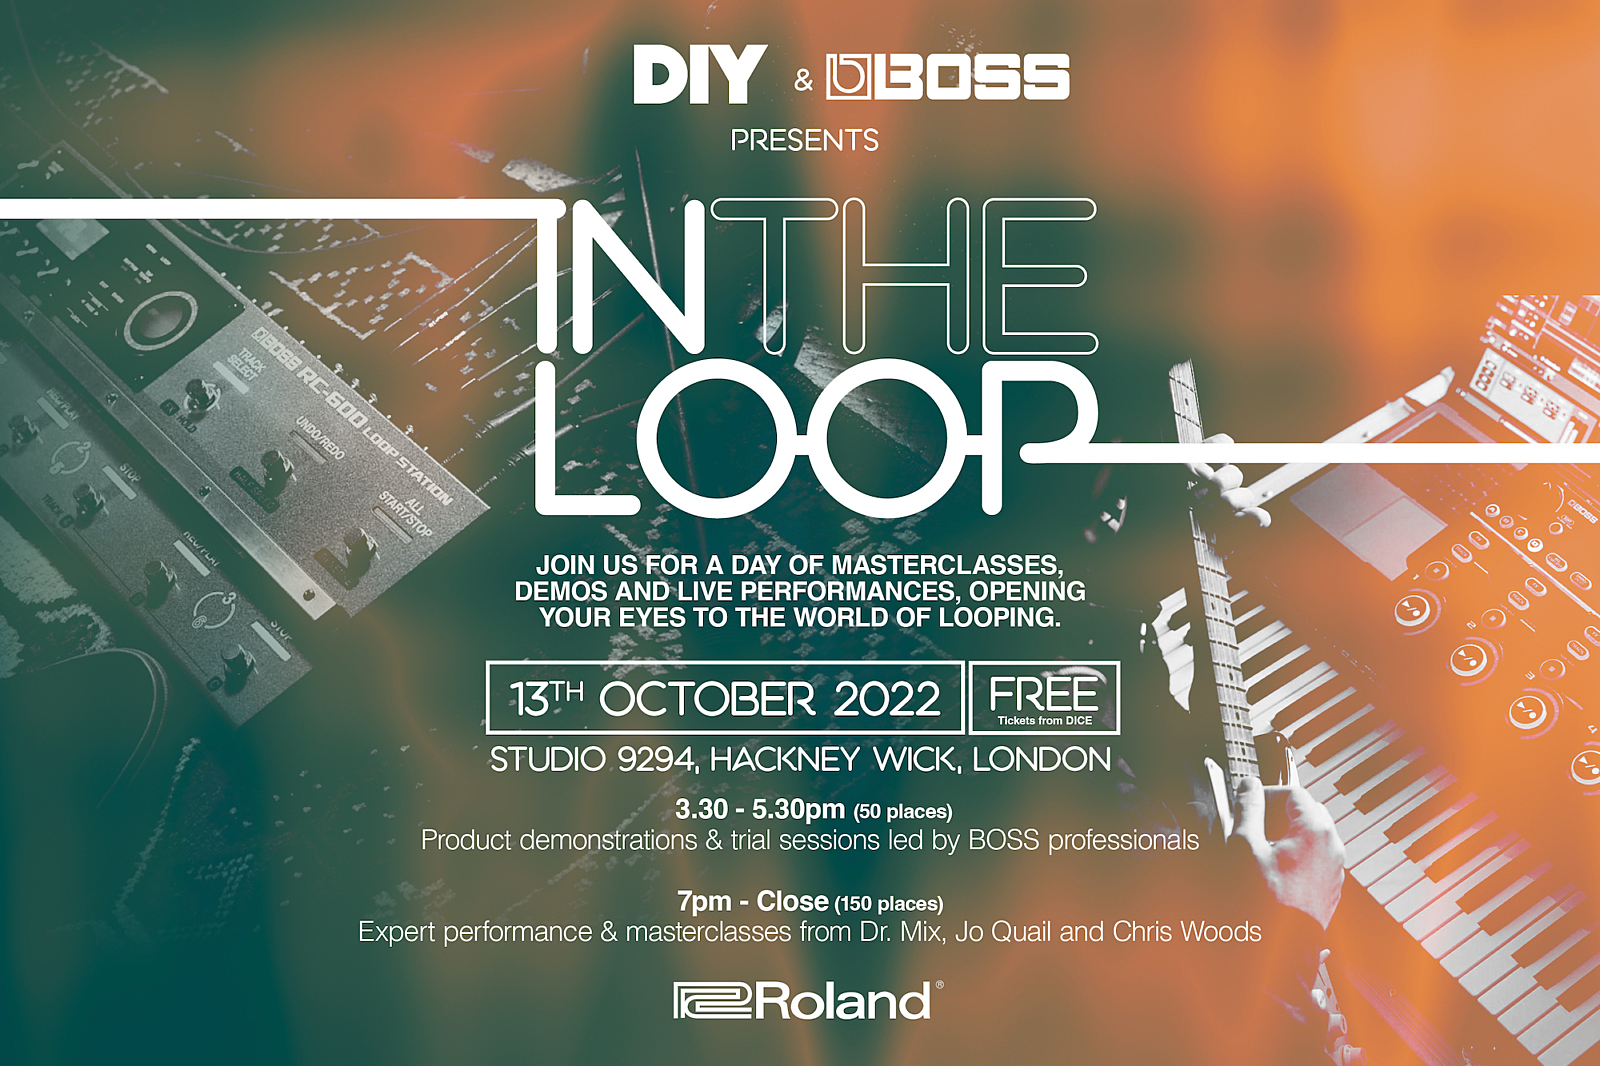 DIY and BOSS are teaming up for free event In The Loop - exploring the art of looping